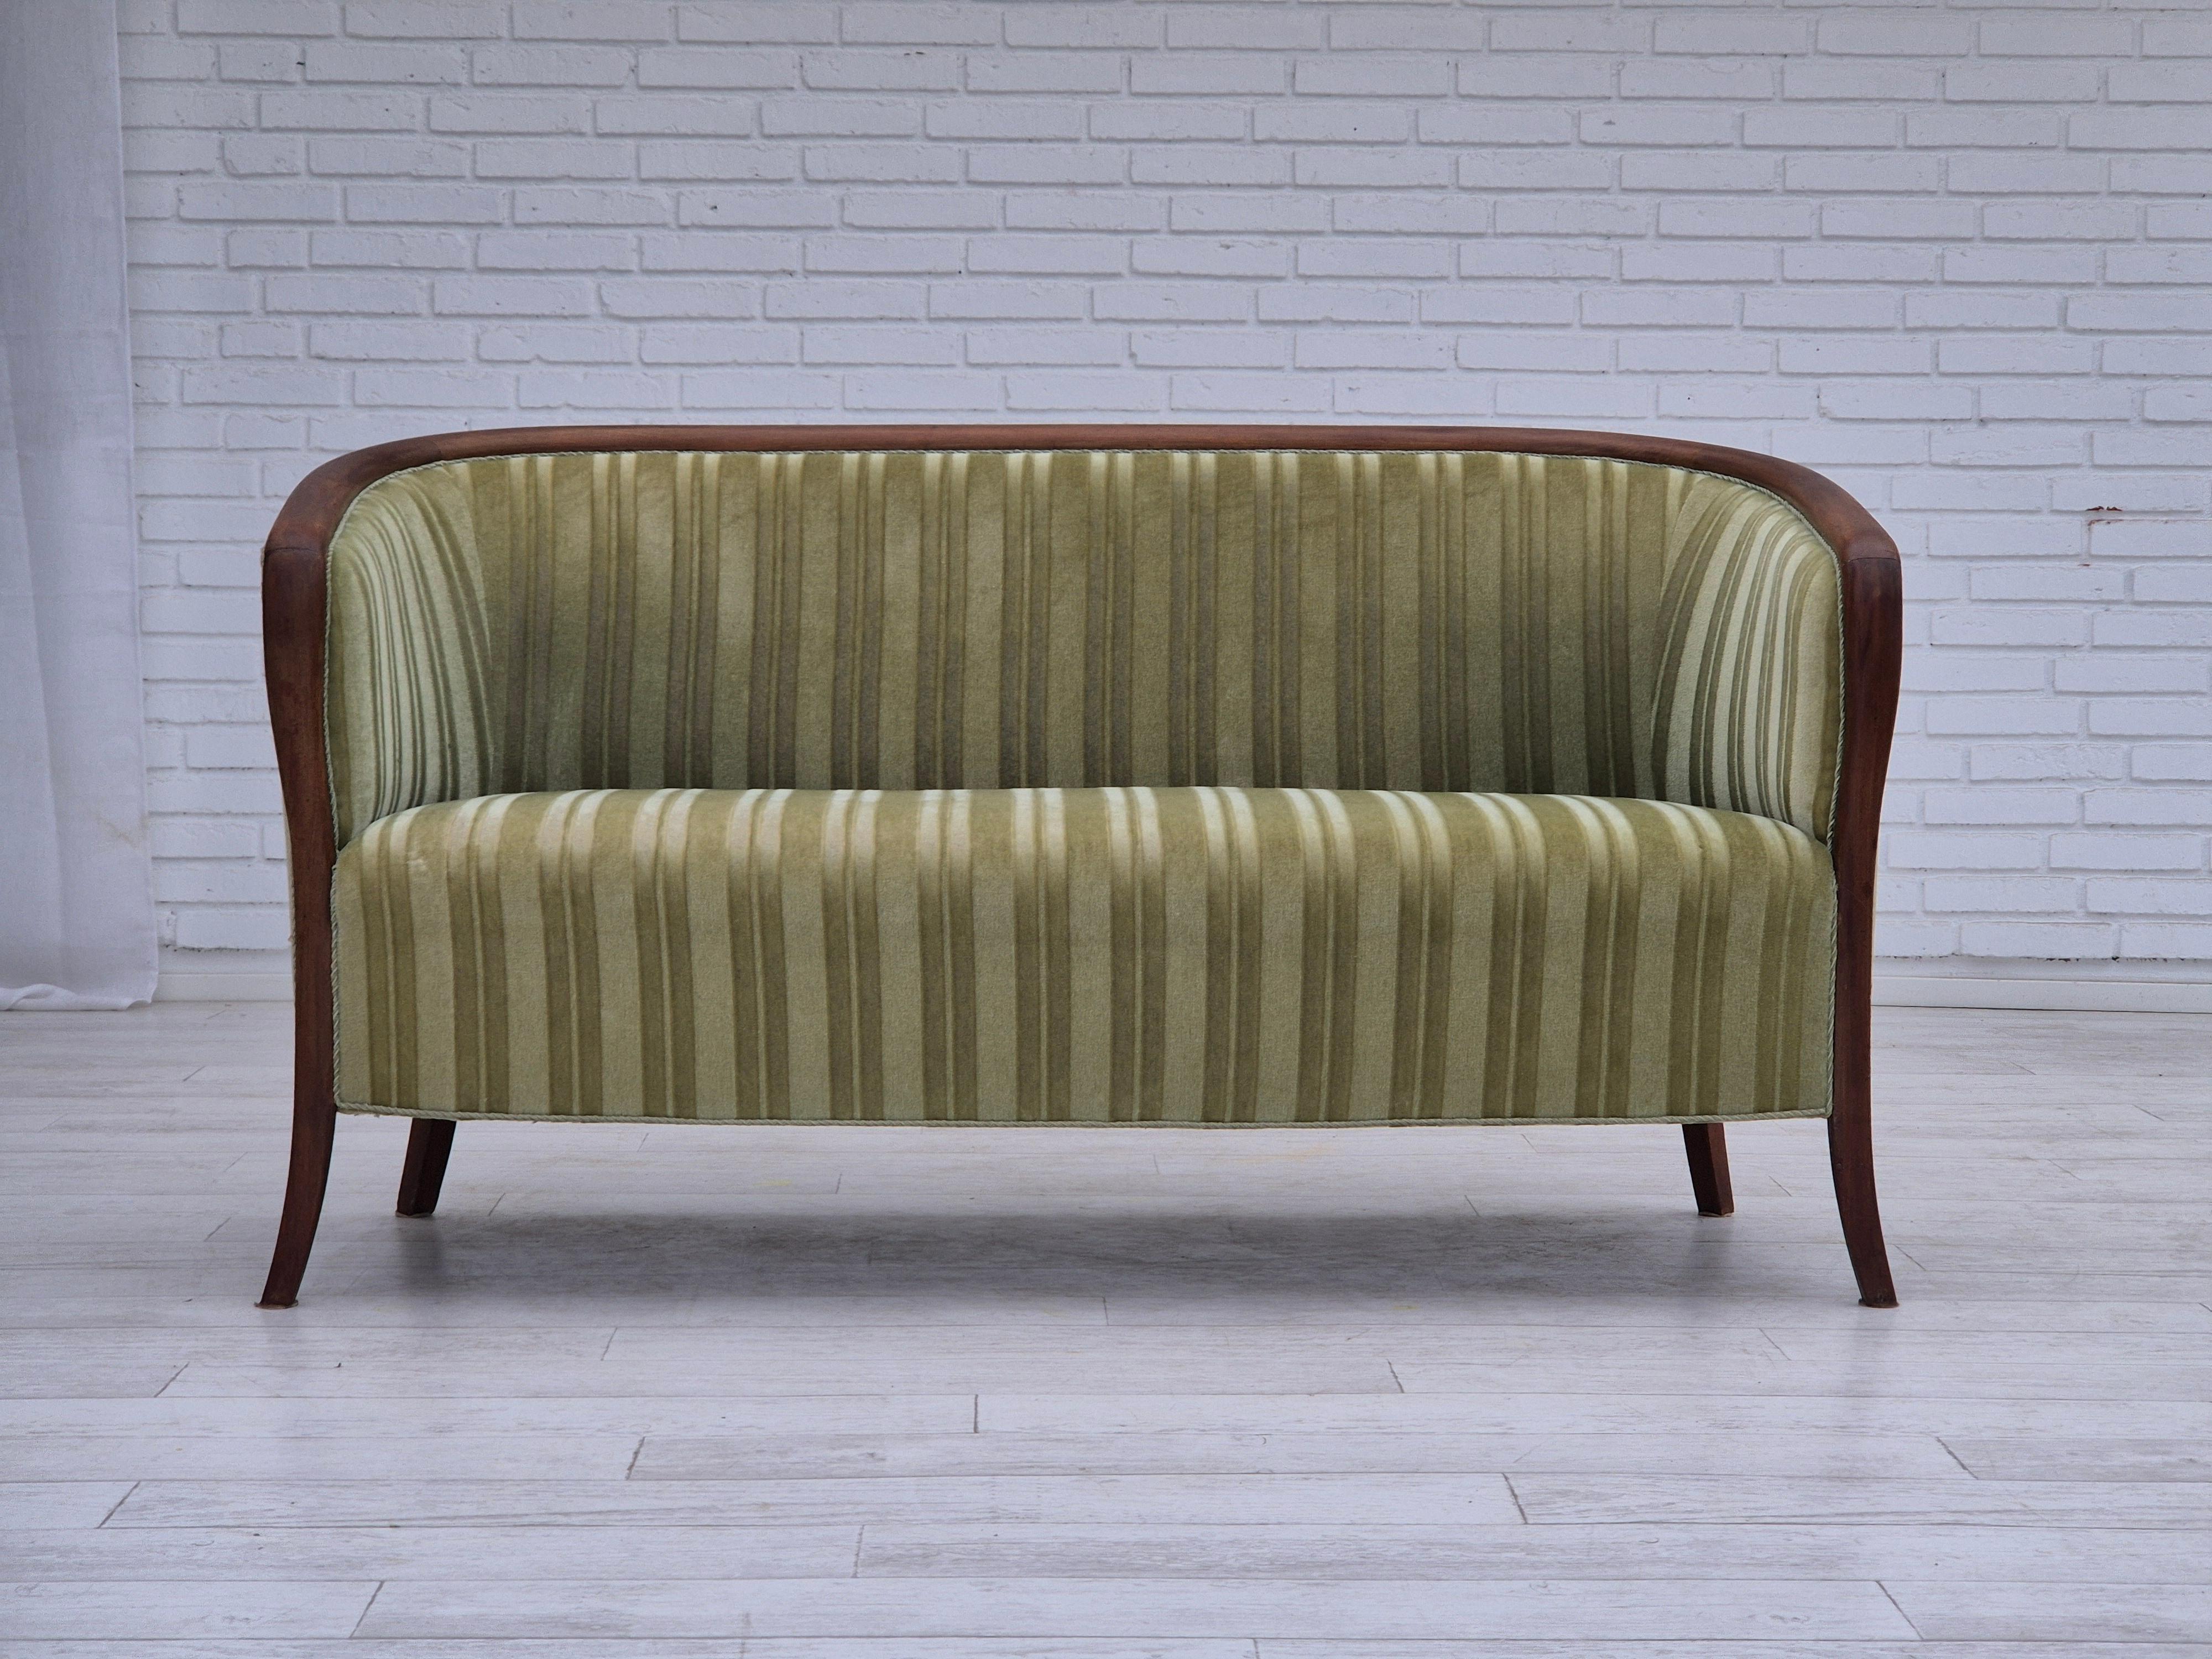 1960s, Scandinavian 2 seater sofa. Original very good condition: no smells and no stains. Original light green furniture velour, teak wood. Springs in the seat. Manufactured by Danish or Swedish furniture manufacturer in about 1955-60s.